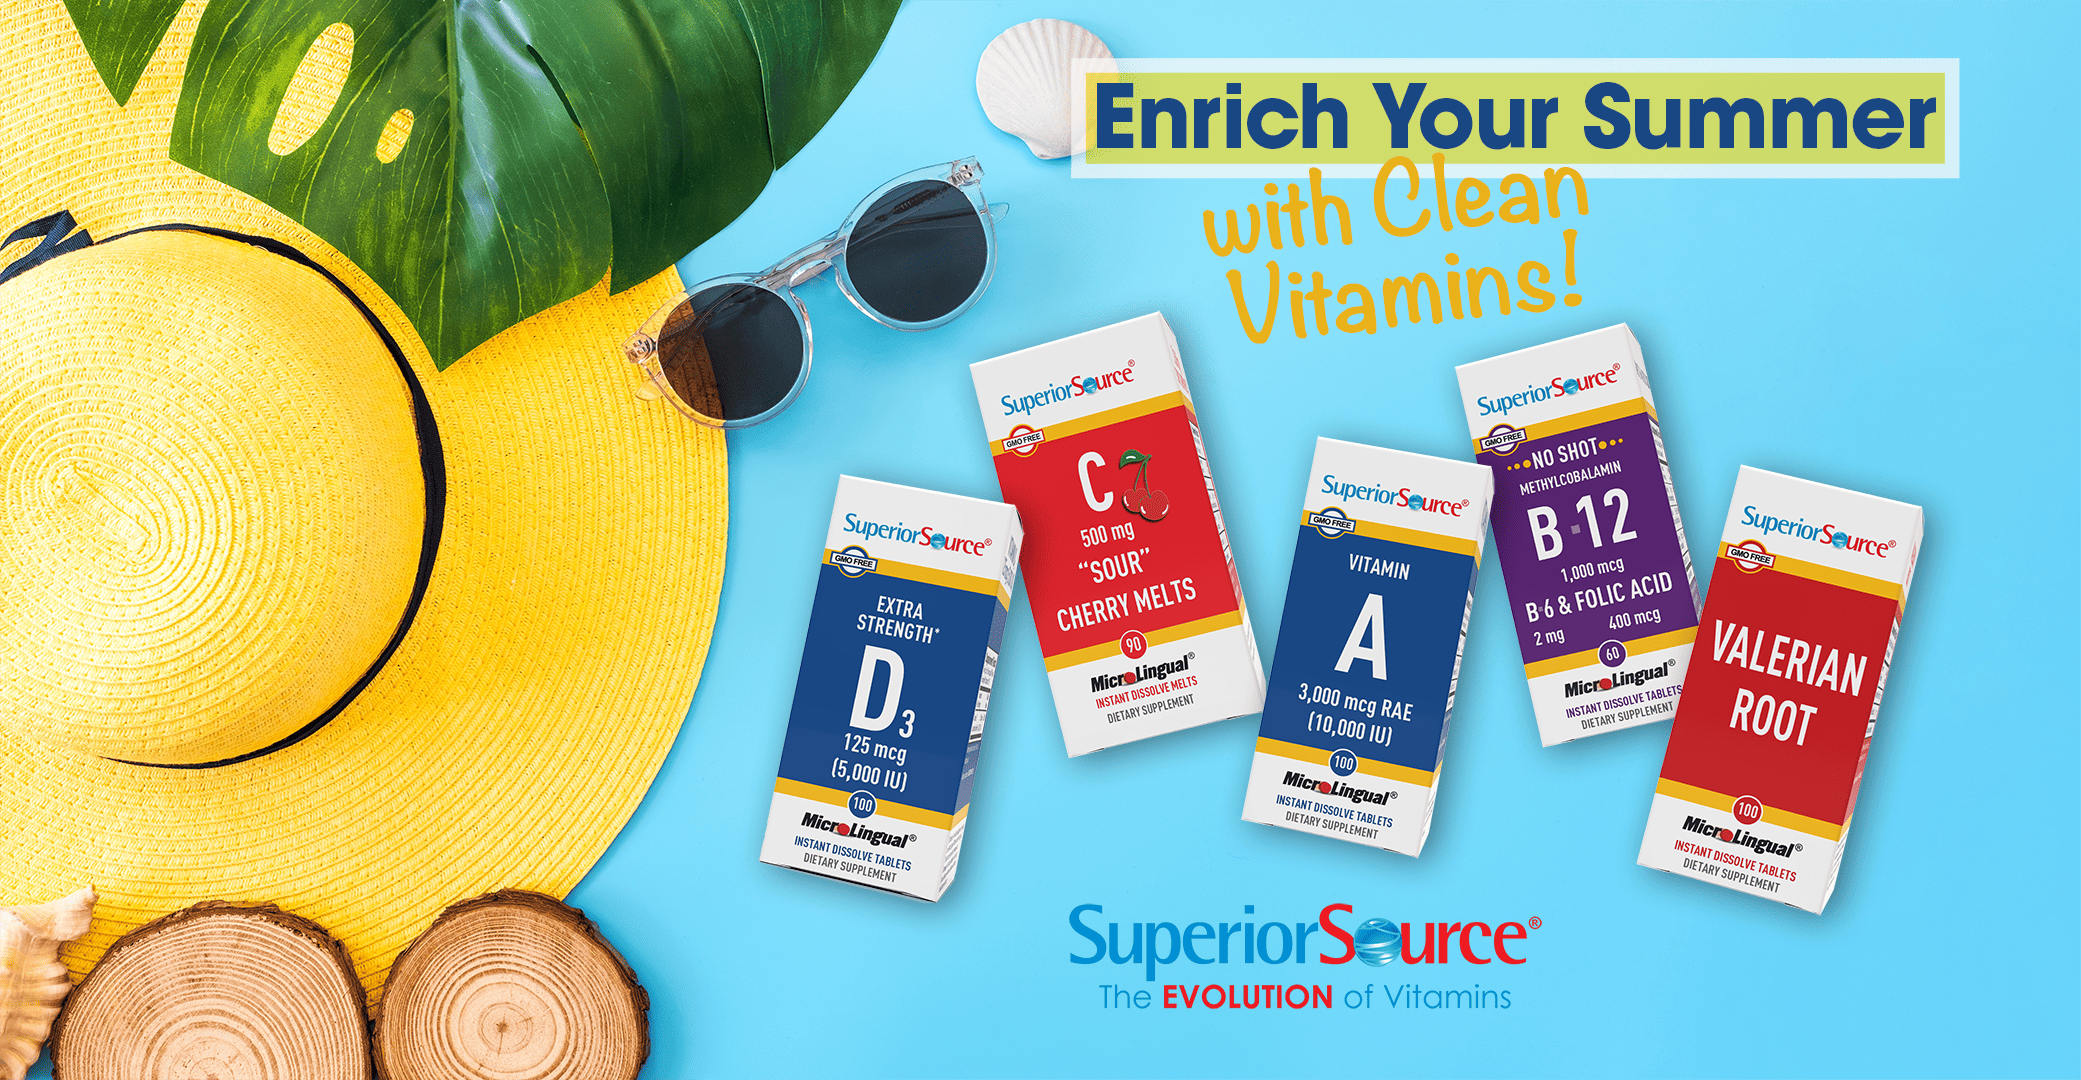 Enrich Your Summer with Clean Vitamins! Superior Source Vitamins Giveaway ($70 Value)